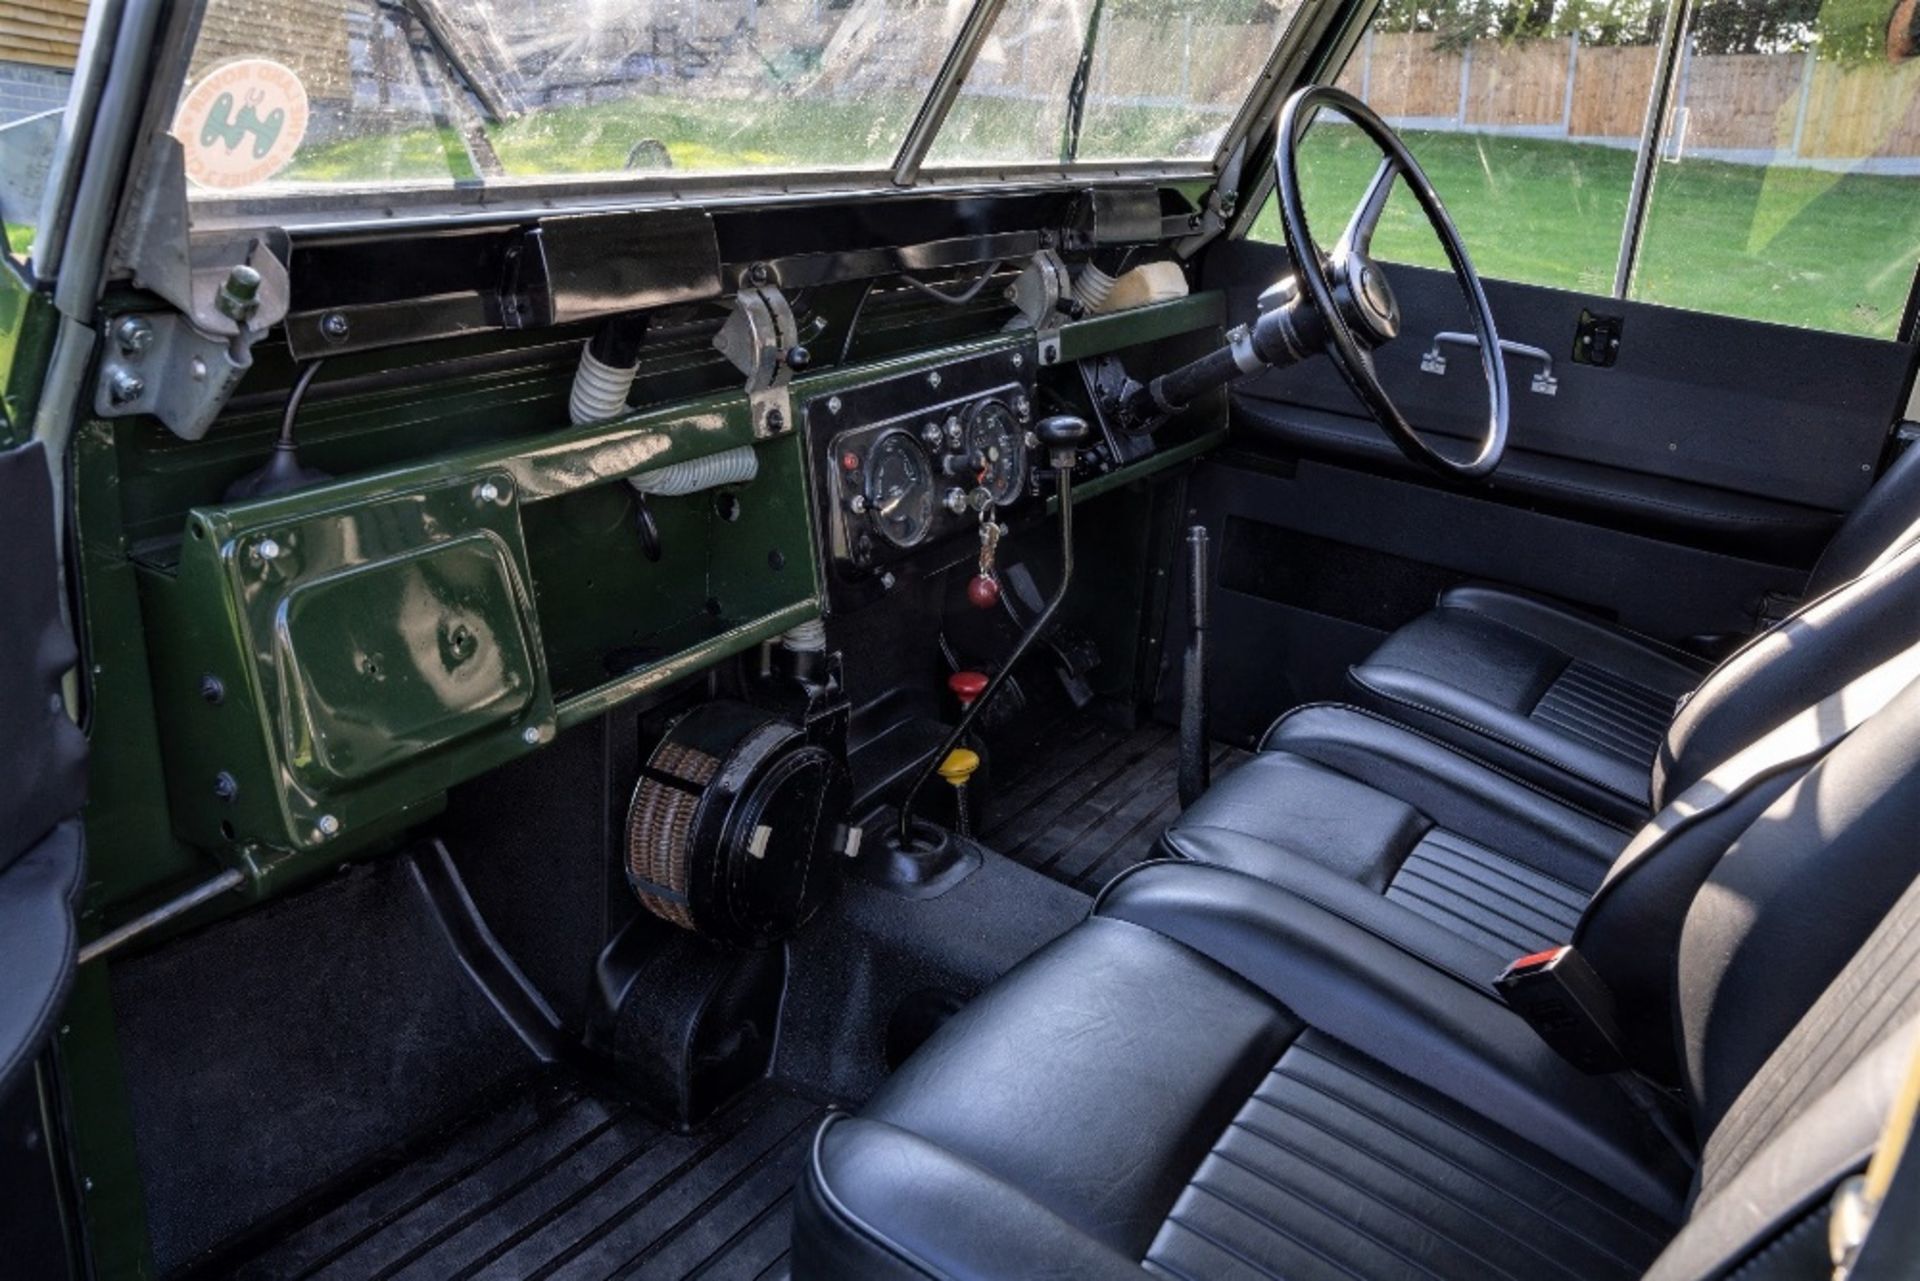 1968 LAND-ROVER SERIES IIA 88” LIGHT UTILITY  Registration Number: KTC 834F - Image 11 of 19